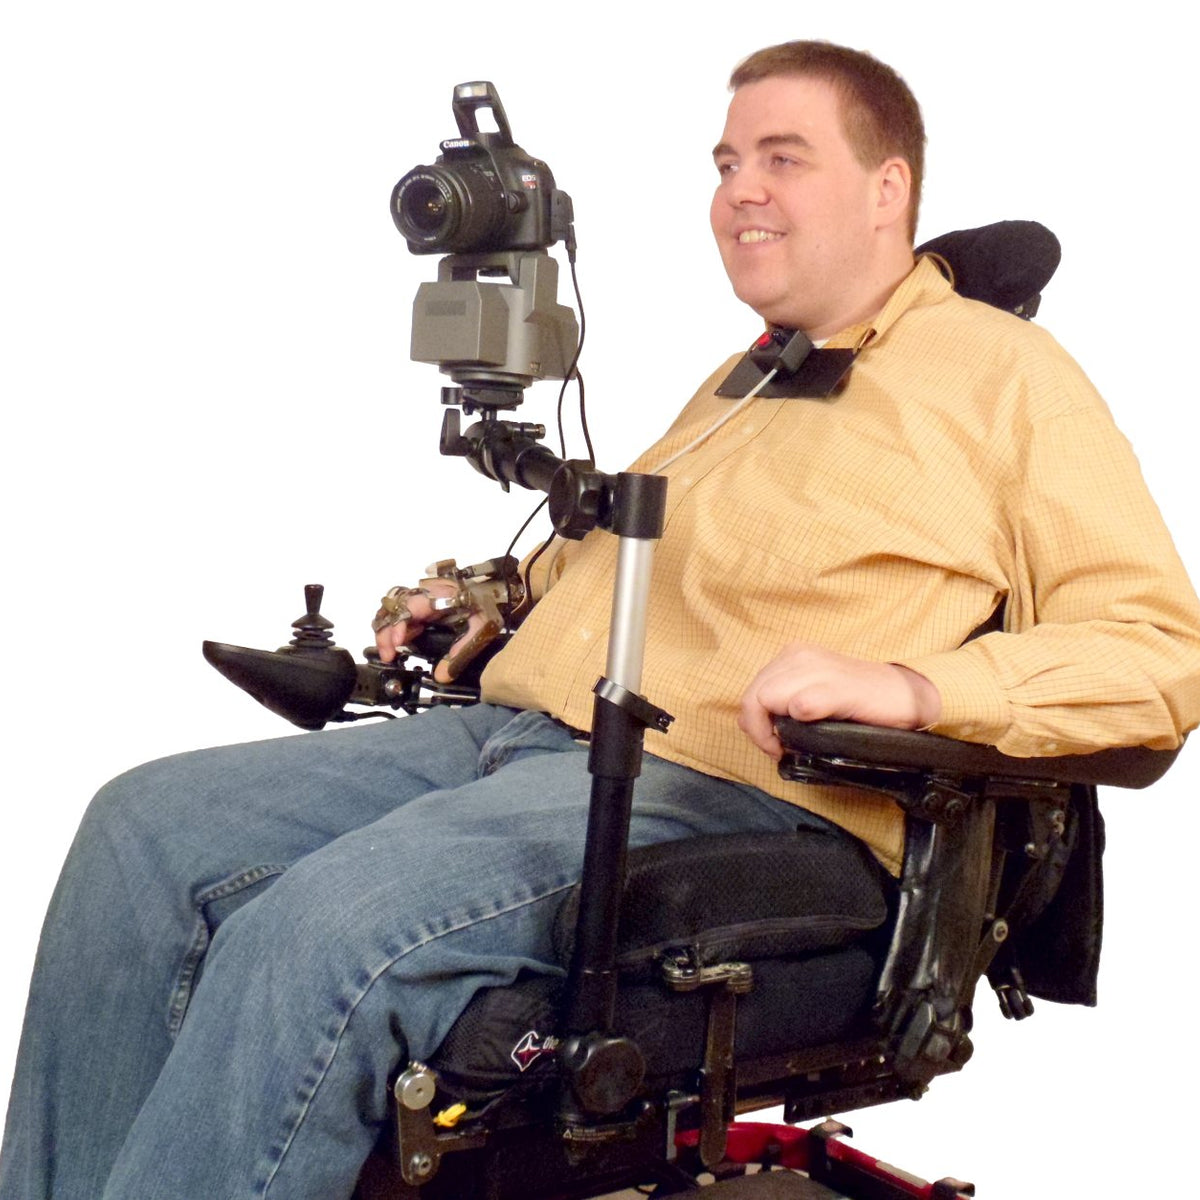 Robo Arm Mount Kit for Wheelchair or Bed - Broadened Horizons Direct